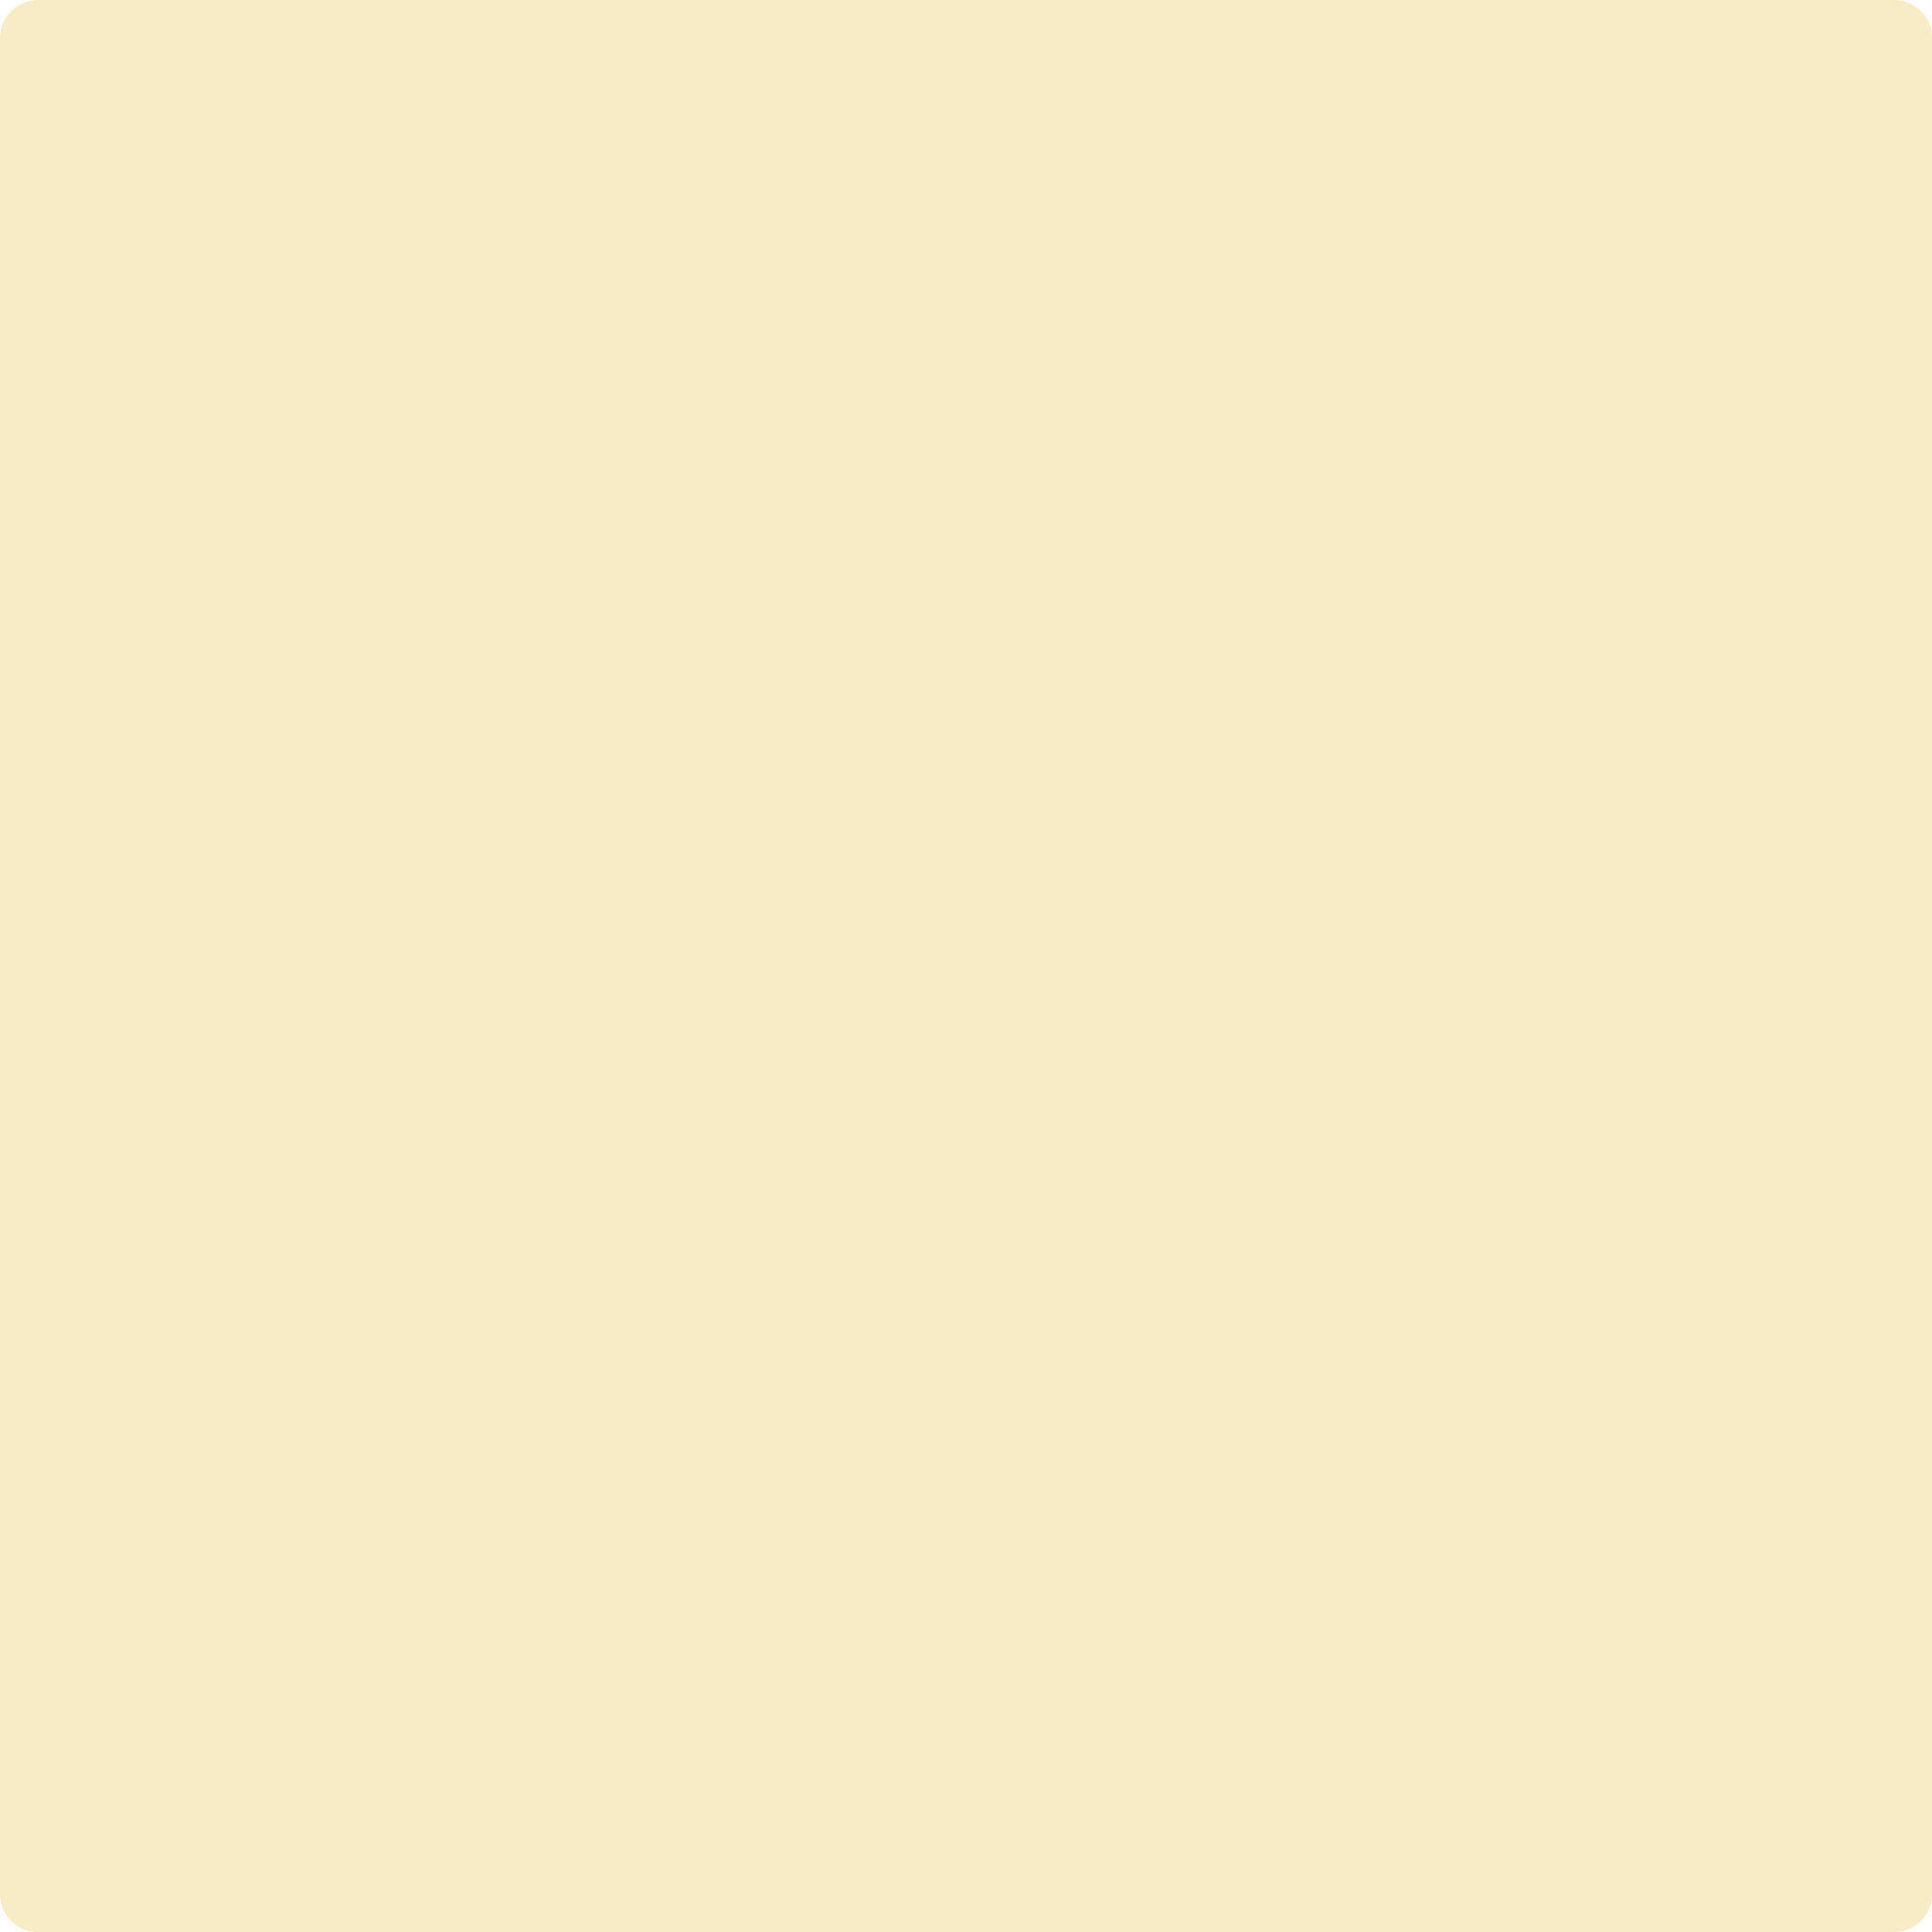 Benjamin Moore 201 Gold Leaf Precisely Matched For Paint and Spray